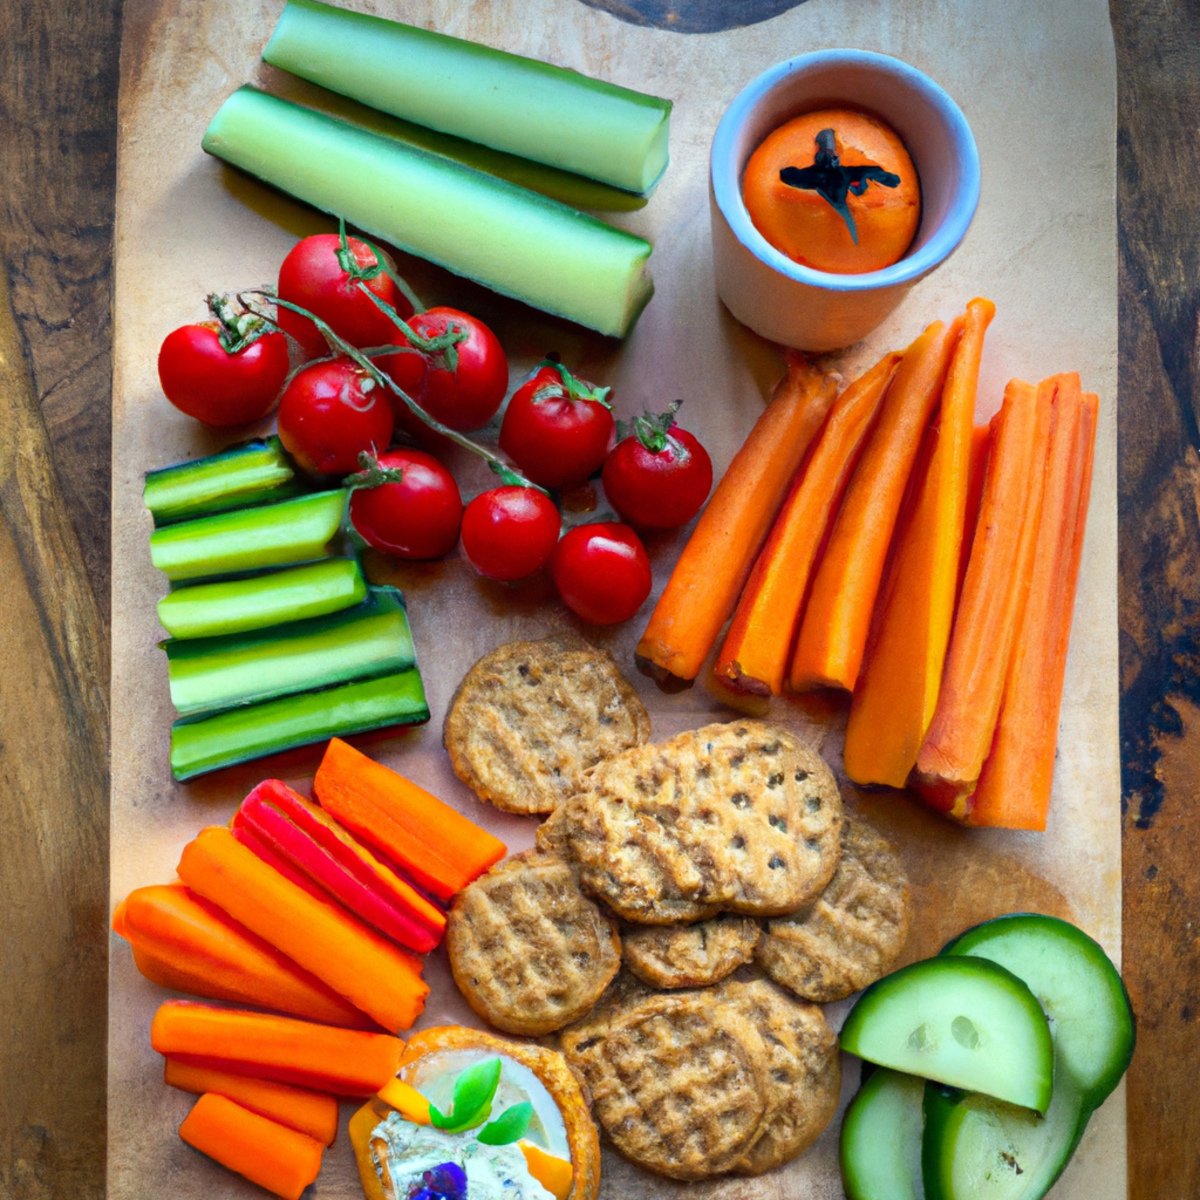 The photo features a wooden cutting board with an array of gluten-free foods arranged in an artful display. In the center of the board sits a bowl of vibrant red cherry tomatoes, surrounded by slices of crisp green cucumber and bright orange carrots. A wedge of creamy avocado rests nearby, while a handful of crunchy gluten-free crackers and a small dish of hummus add texture and depth to the scene. A sprig of fresh herbs adds a pop of green, and the natural wood grain of the cutting board provides a warm, rustic backdrop. The photo captures the essence of healthy, wholesome eating, and invites the viewer to explore the world of gluten-free cuisine.